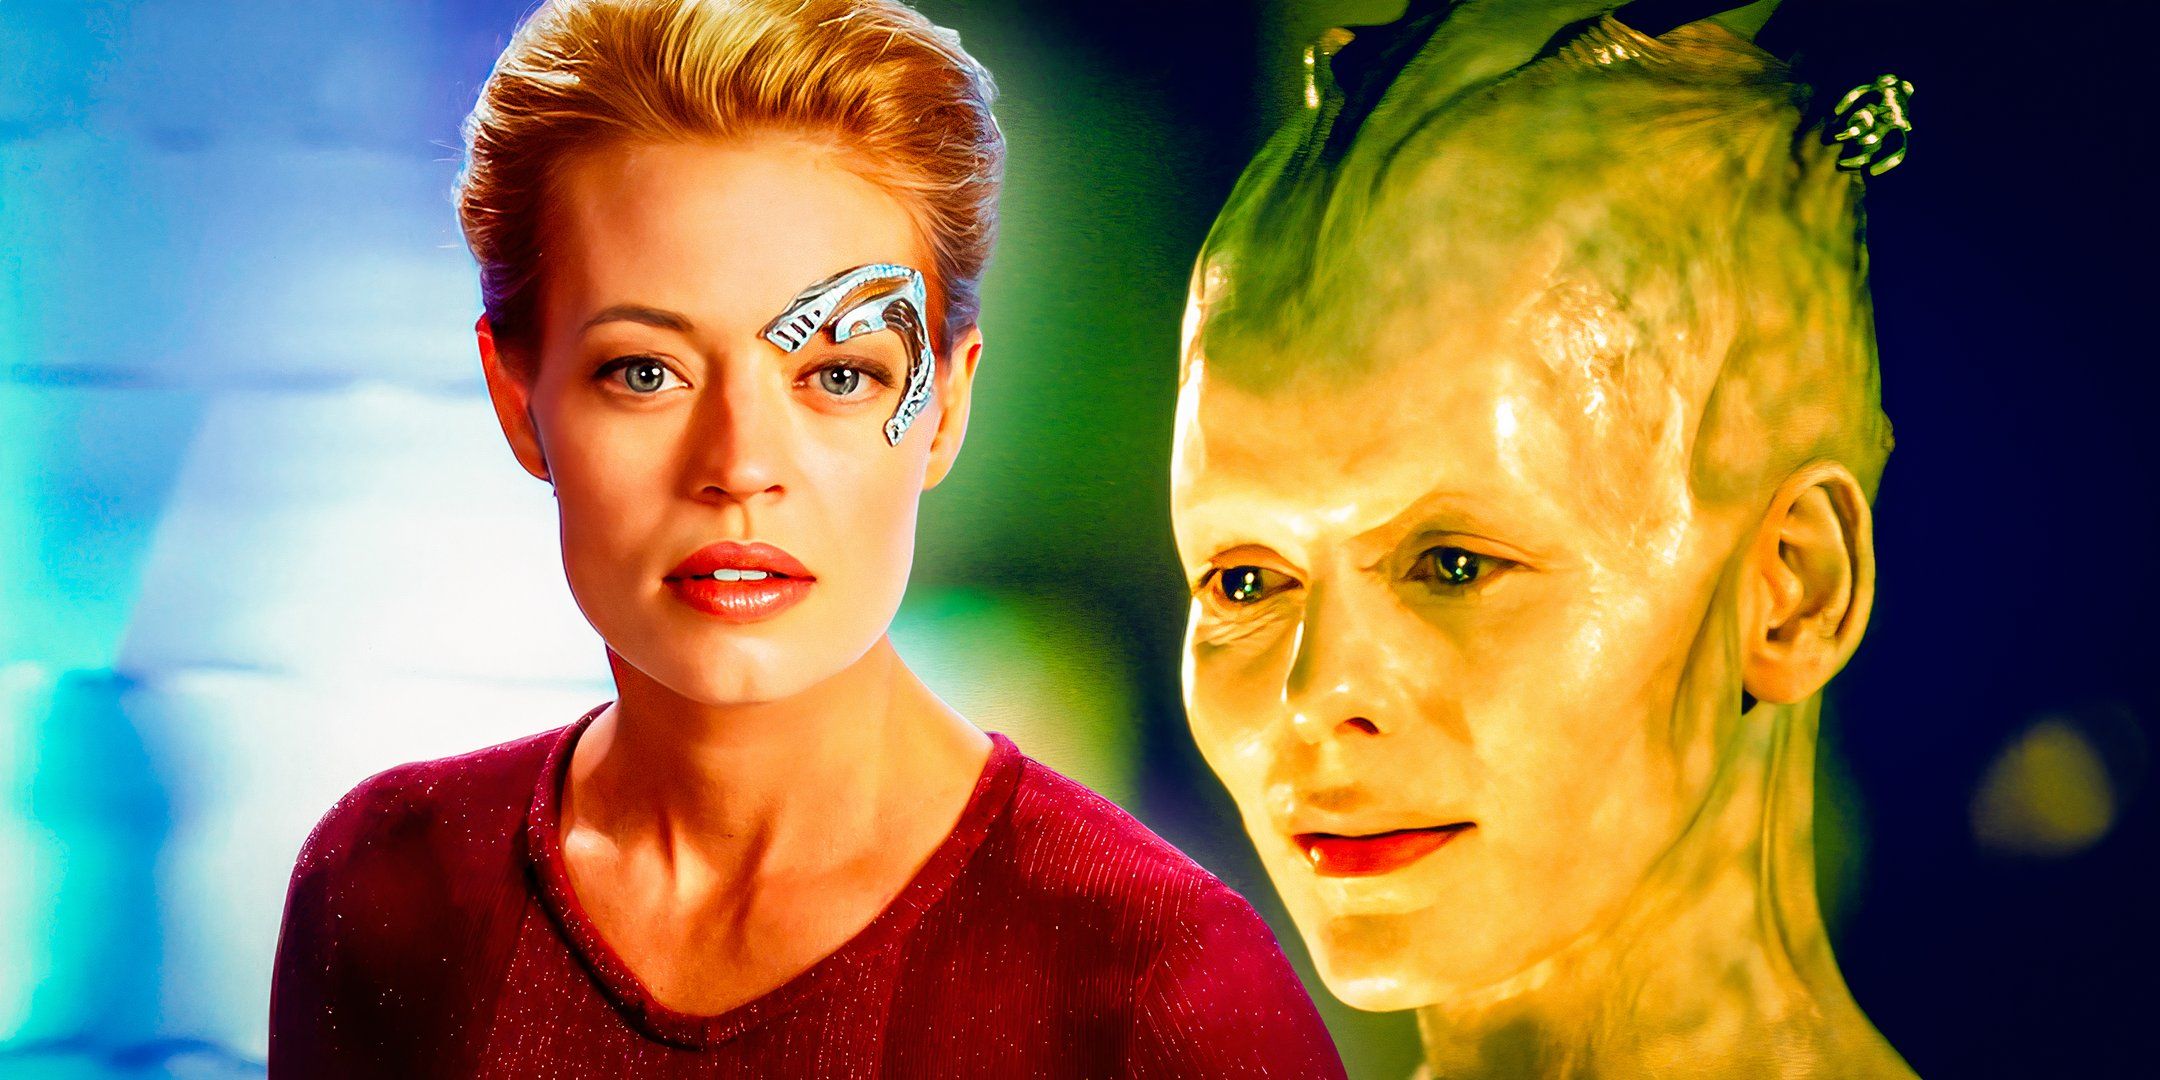 Collage of Seven of Nine (Jeri Ryan) from Star Trek: Voyager and the Borg Queen (Alice Krige) from Star Trek: First Contact.